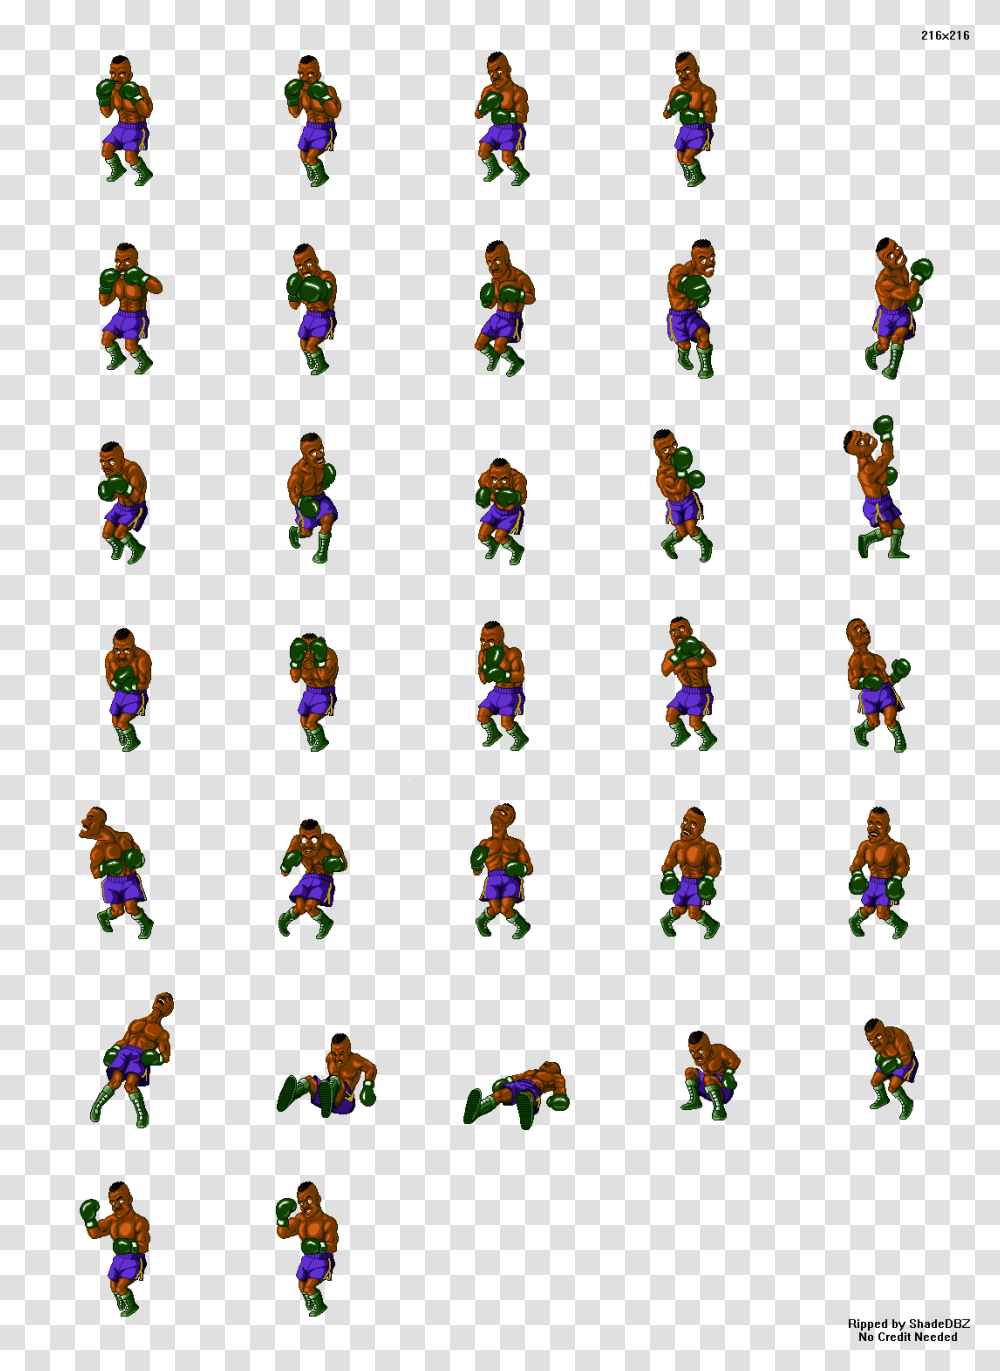 Piston Hurricane Sprite Sheetsuper Punch Out Punch Out Little Mac Sprite, Person, Human, Super Mario, Final Fantasy Transparent Png